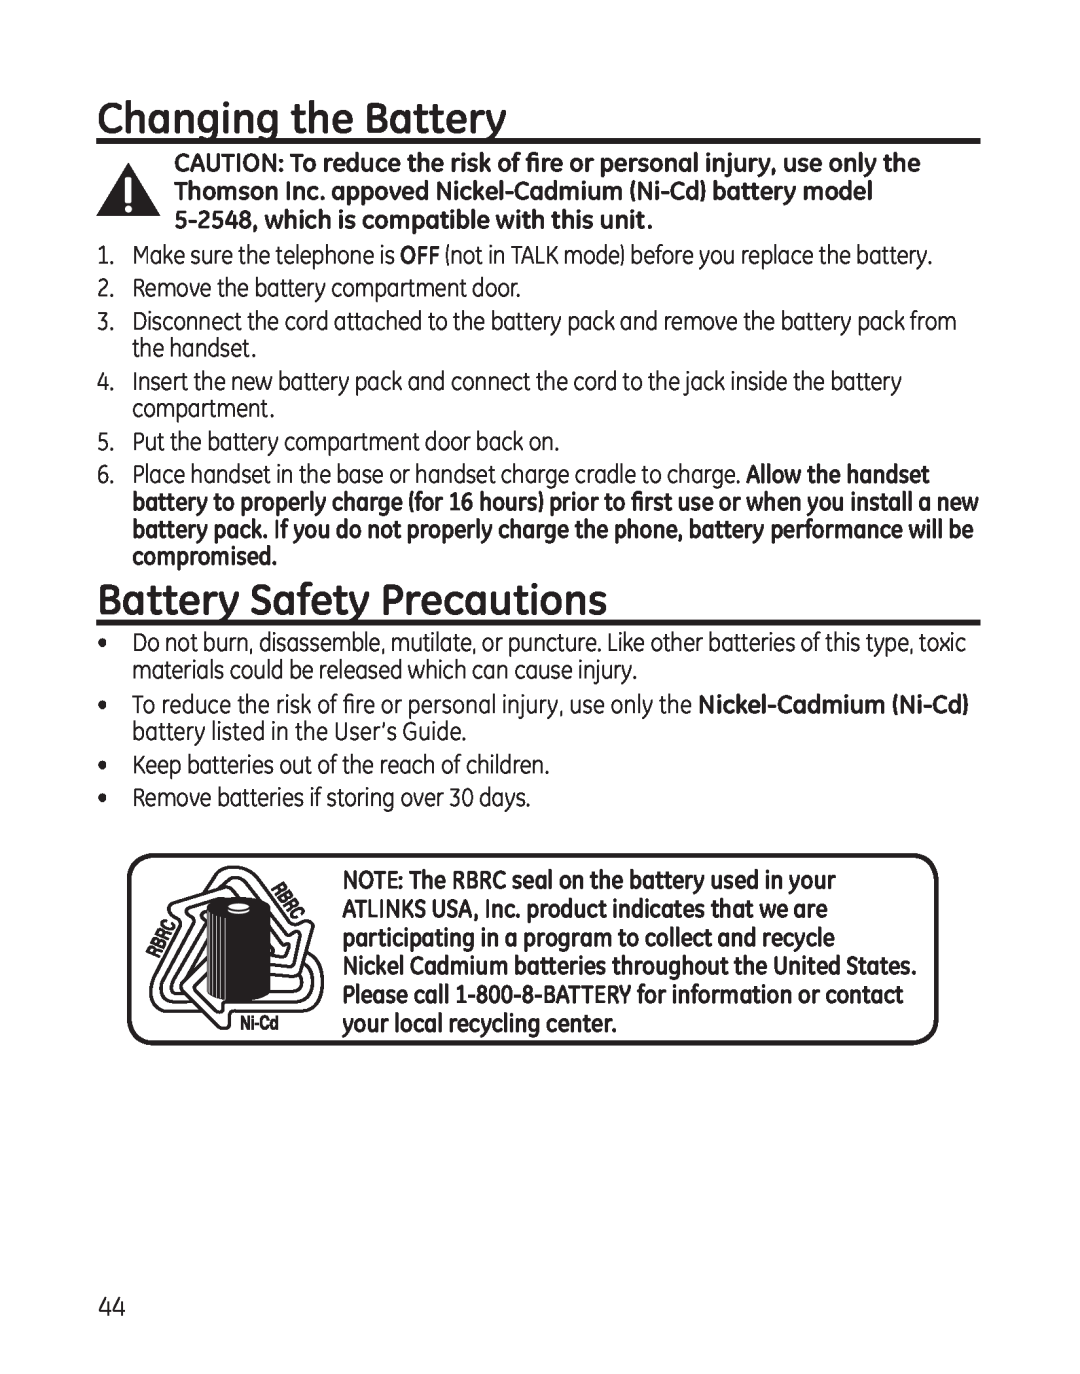 GE 25865 manual Changing the Battery, Battery Safety Precautions 